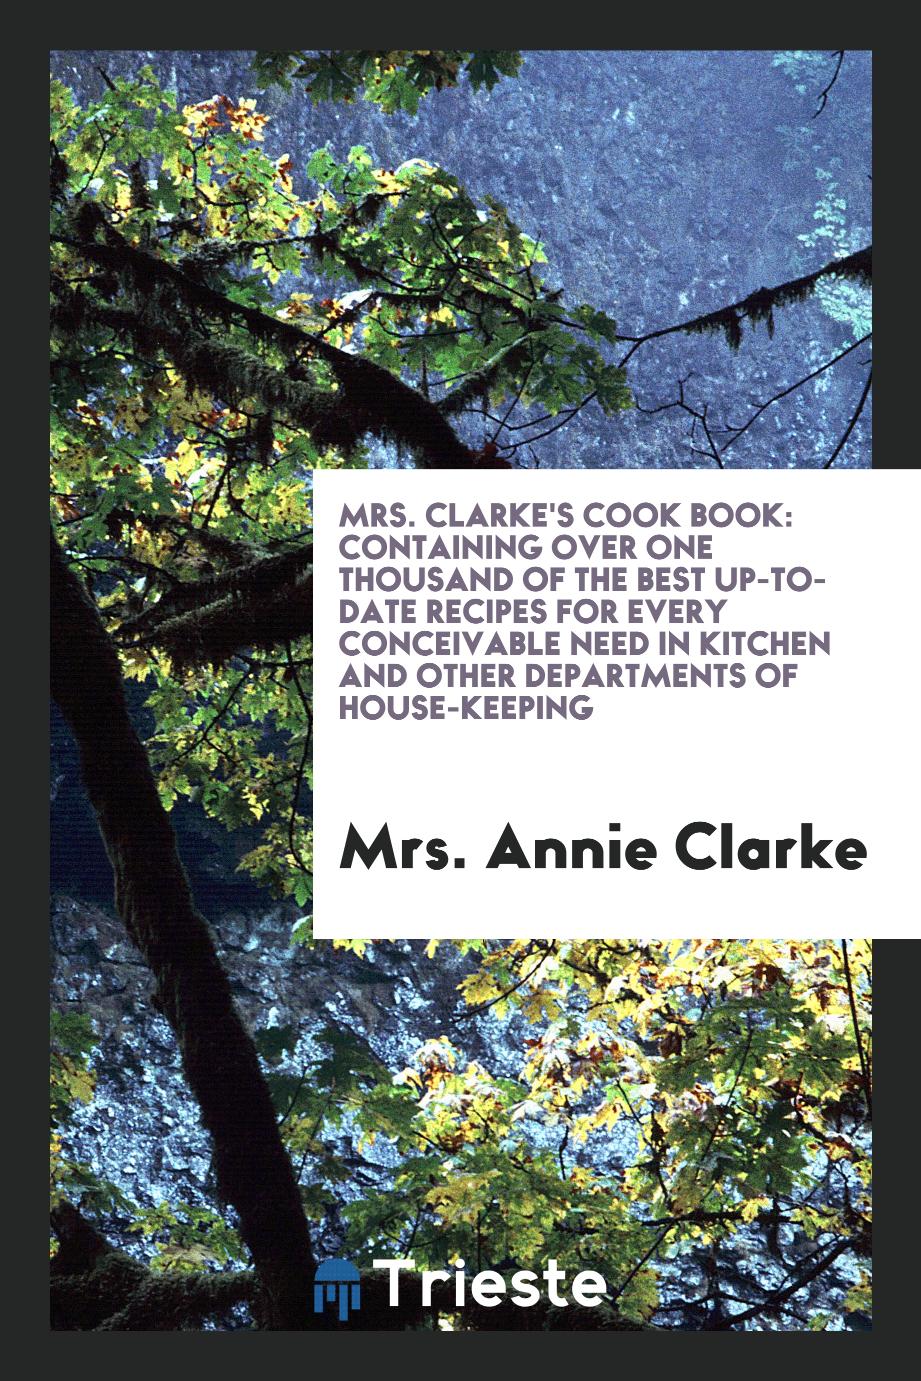 Mrs. Clarke's Cook Book: Containing over One Thousand of the Best Up-To-Date Recipes for Every Conceivable Need in Kitchen and Other Departments of House-Keeping